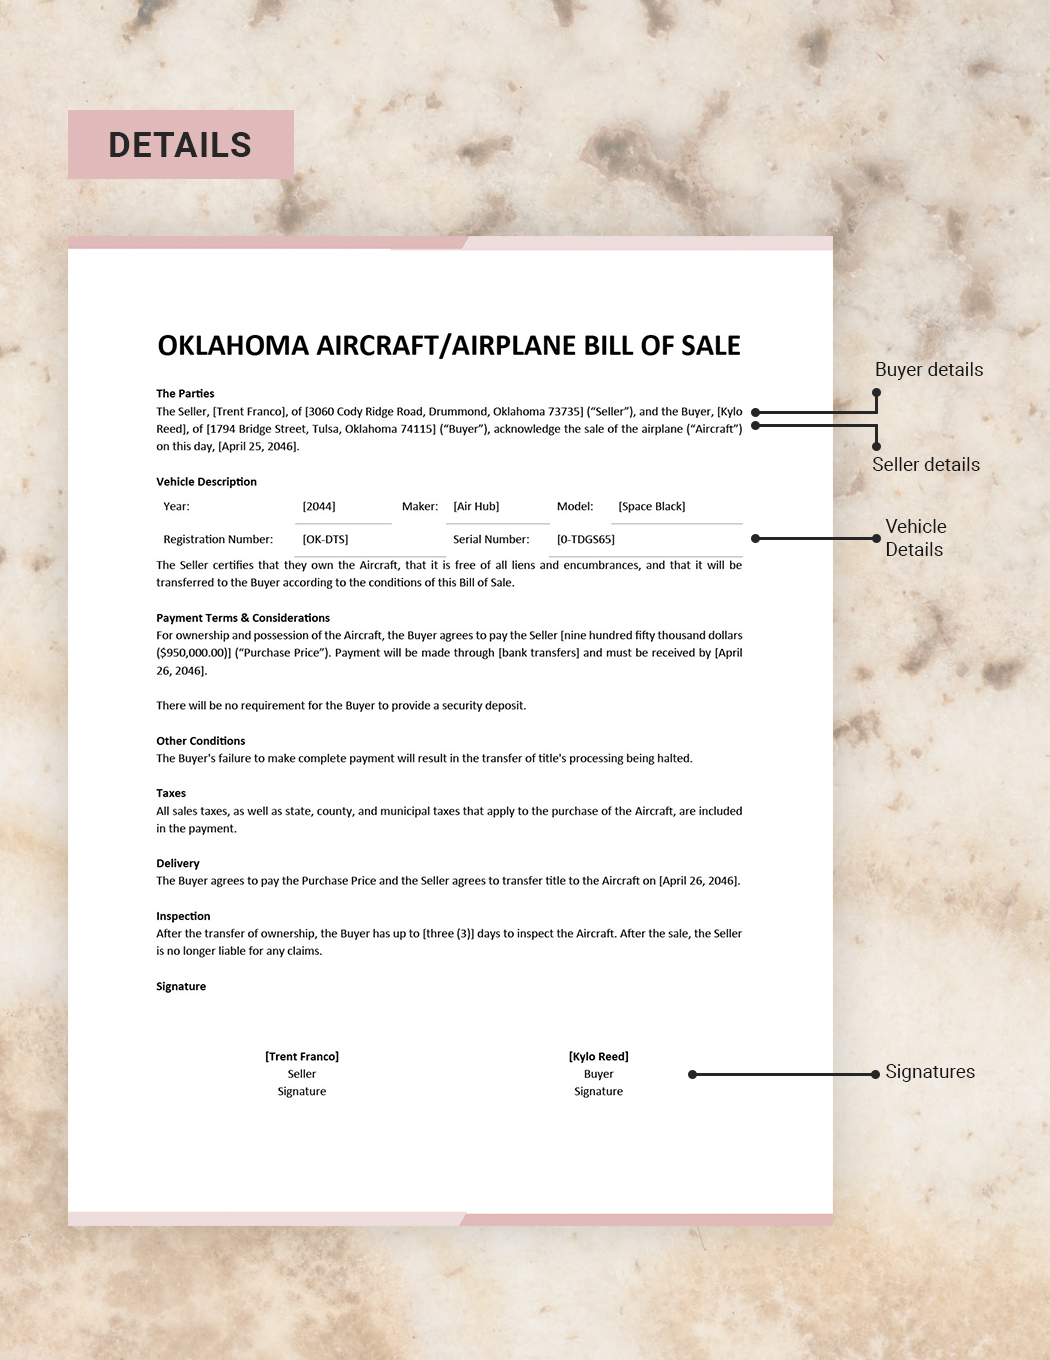 Oklahoma Aircraft/Airplane Bill of Sale Template